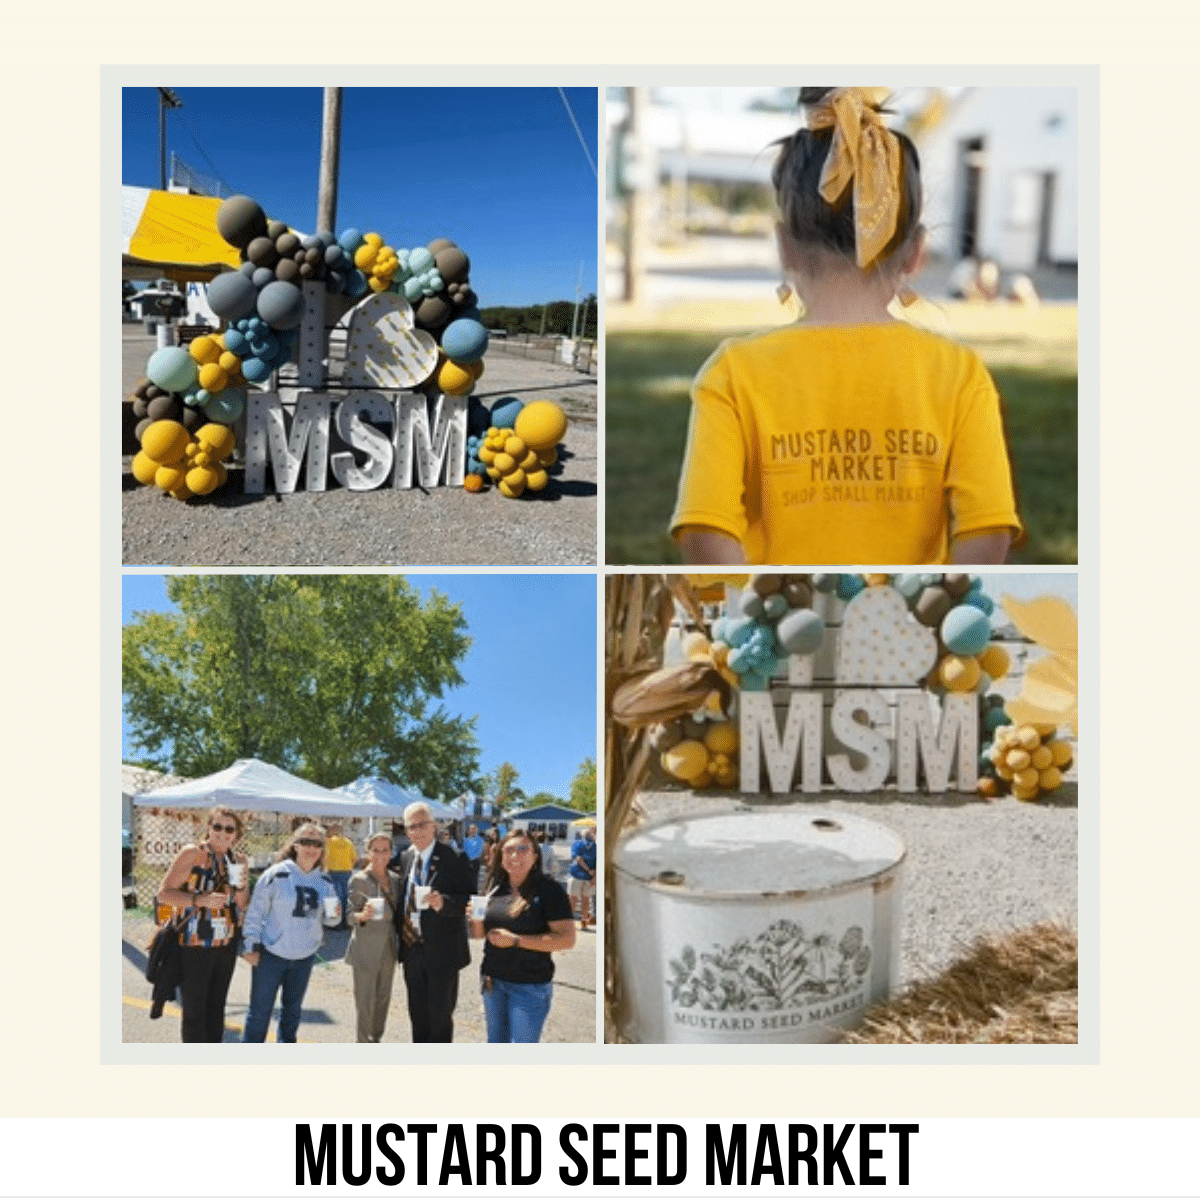 square image with 4 photos of the Mustard Seed Market: A display with balloons, a large heart and the letters MSM. A young girl walking away from the camera wearing a yellow tee shirt with Mustard Seed Market on the back. A group photo with booths with white canopies and trees in the background. Another view of the MSM display with a Mustard Seed Market barrel drum in the foreground. All images courtesy of Mustard Seed Market